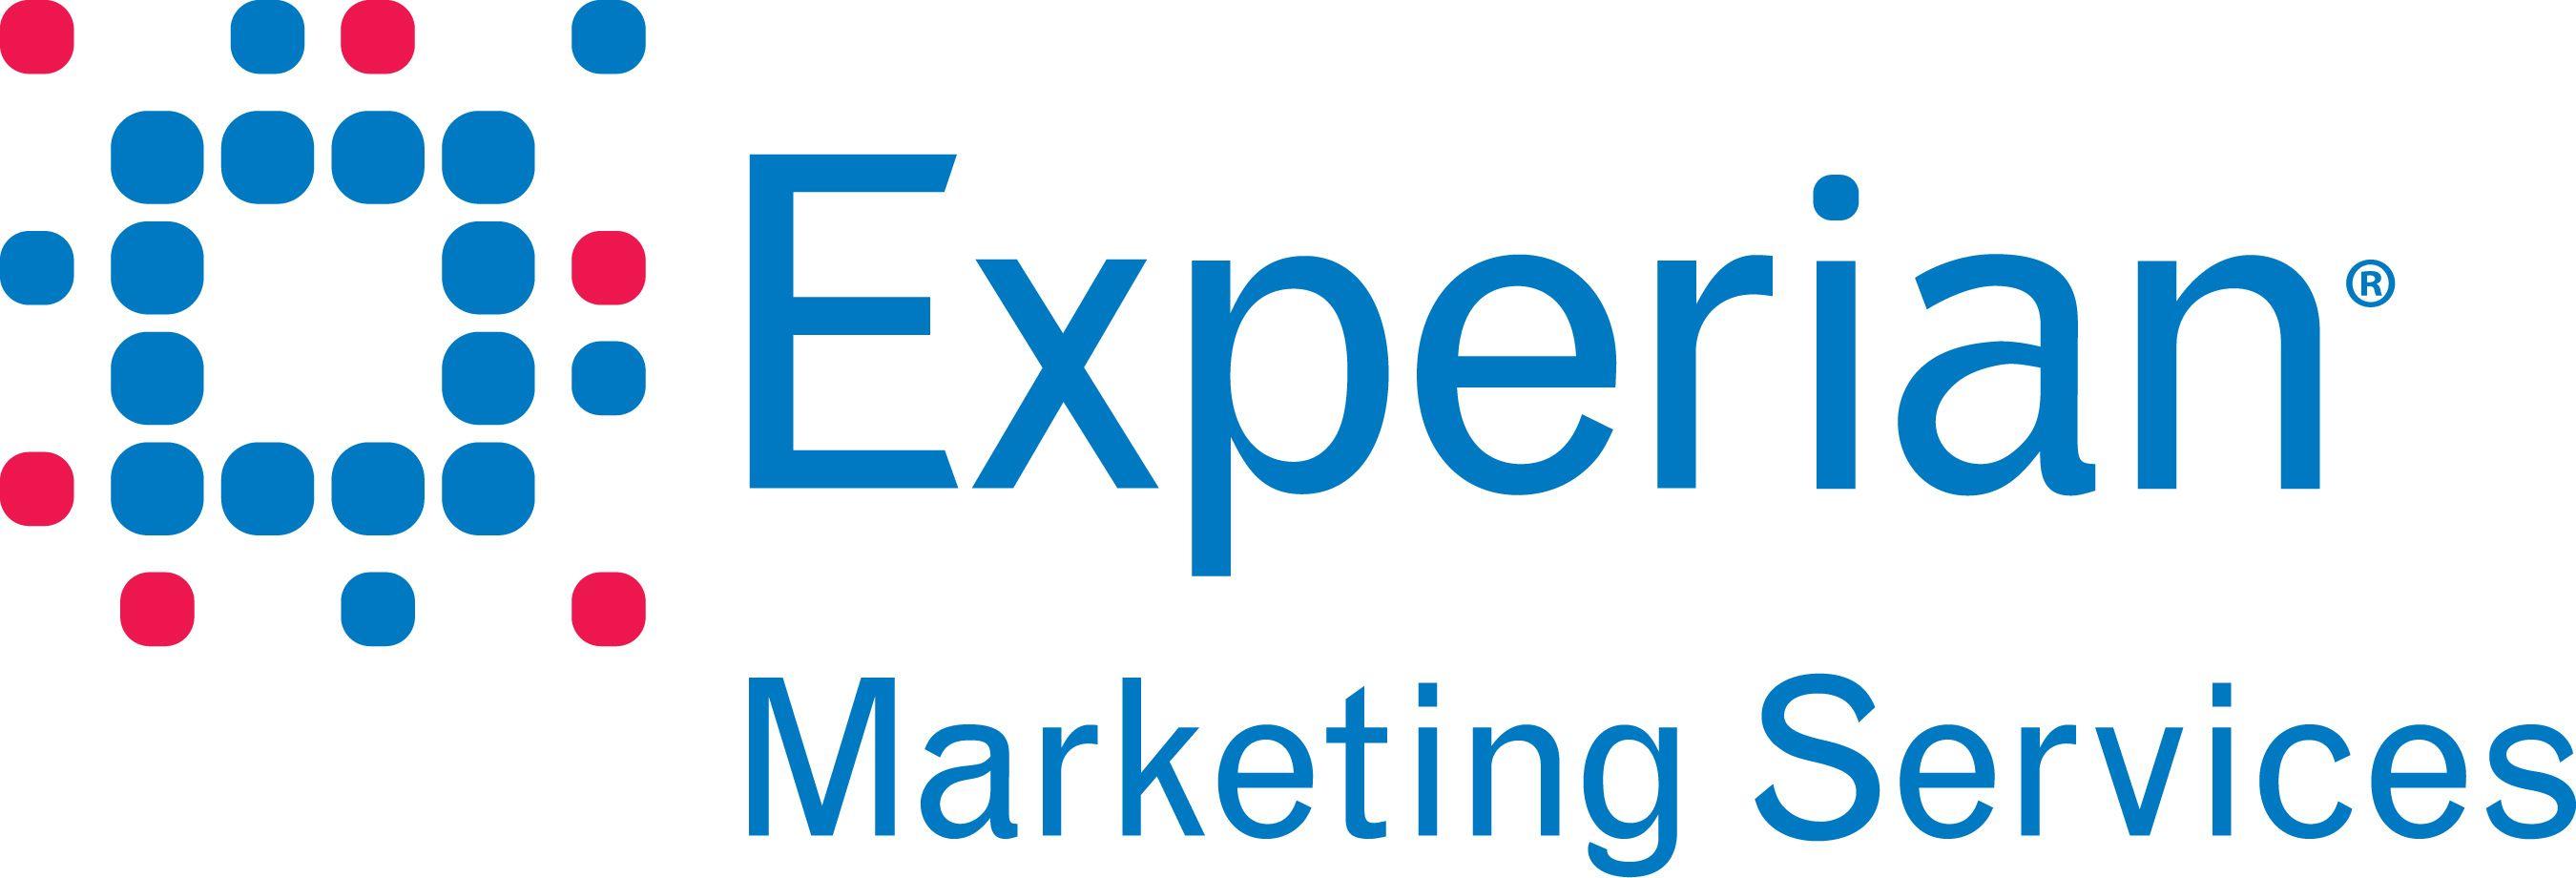 New Experian Logo - New insight from Experian Marketing Services helps brands prepare